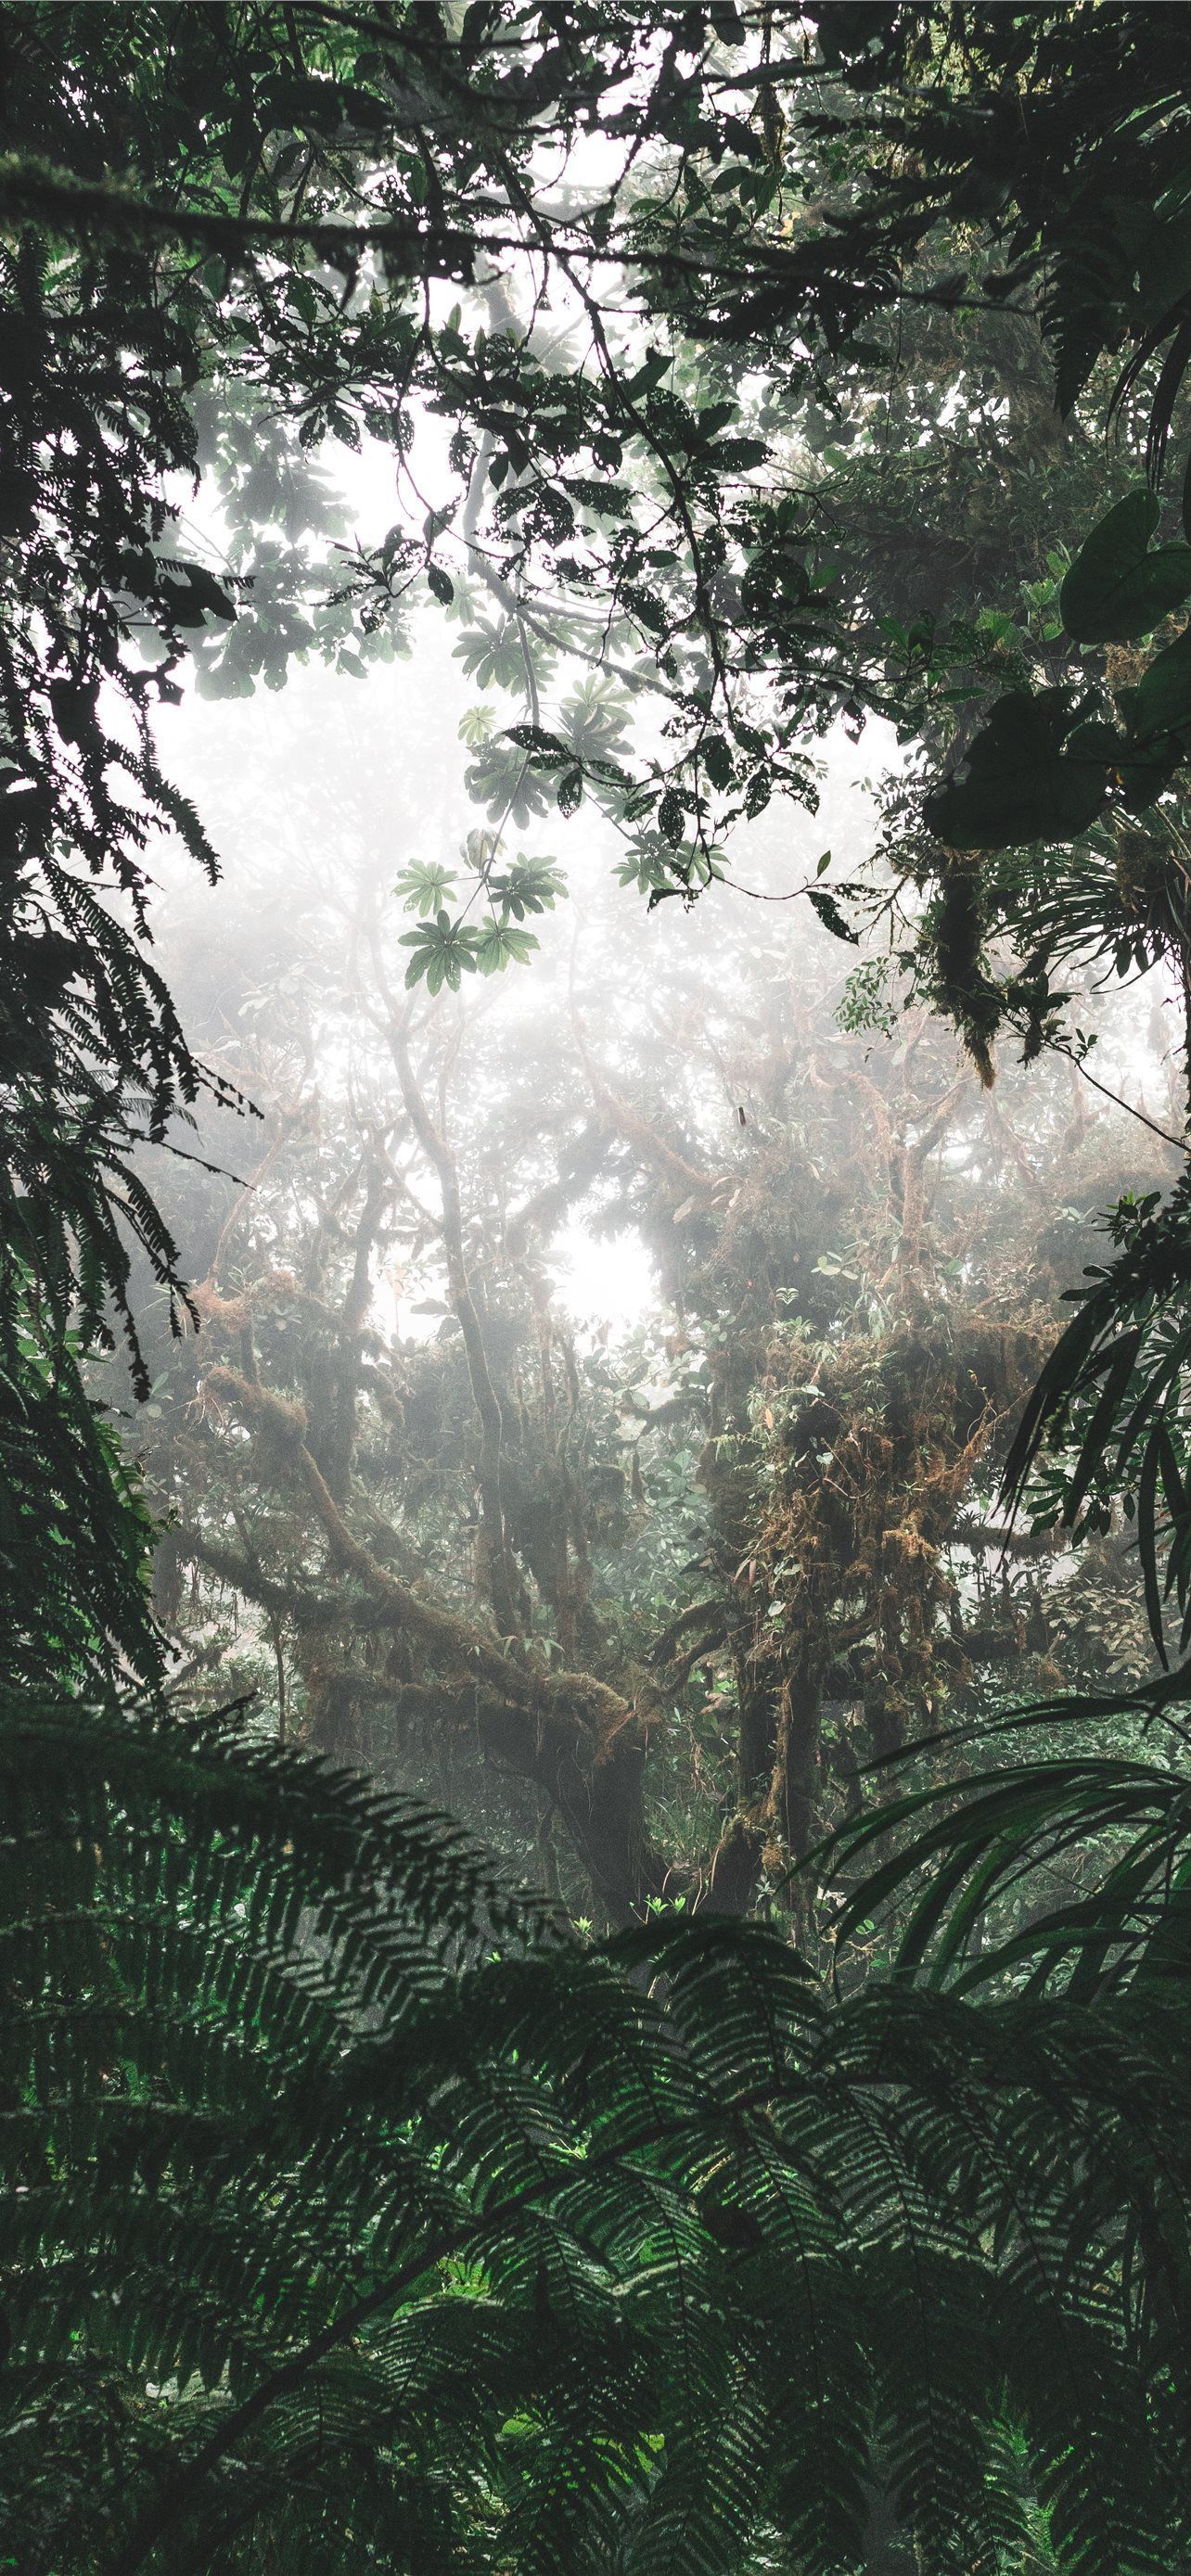 A forest with trees and plants - Jungle